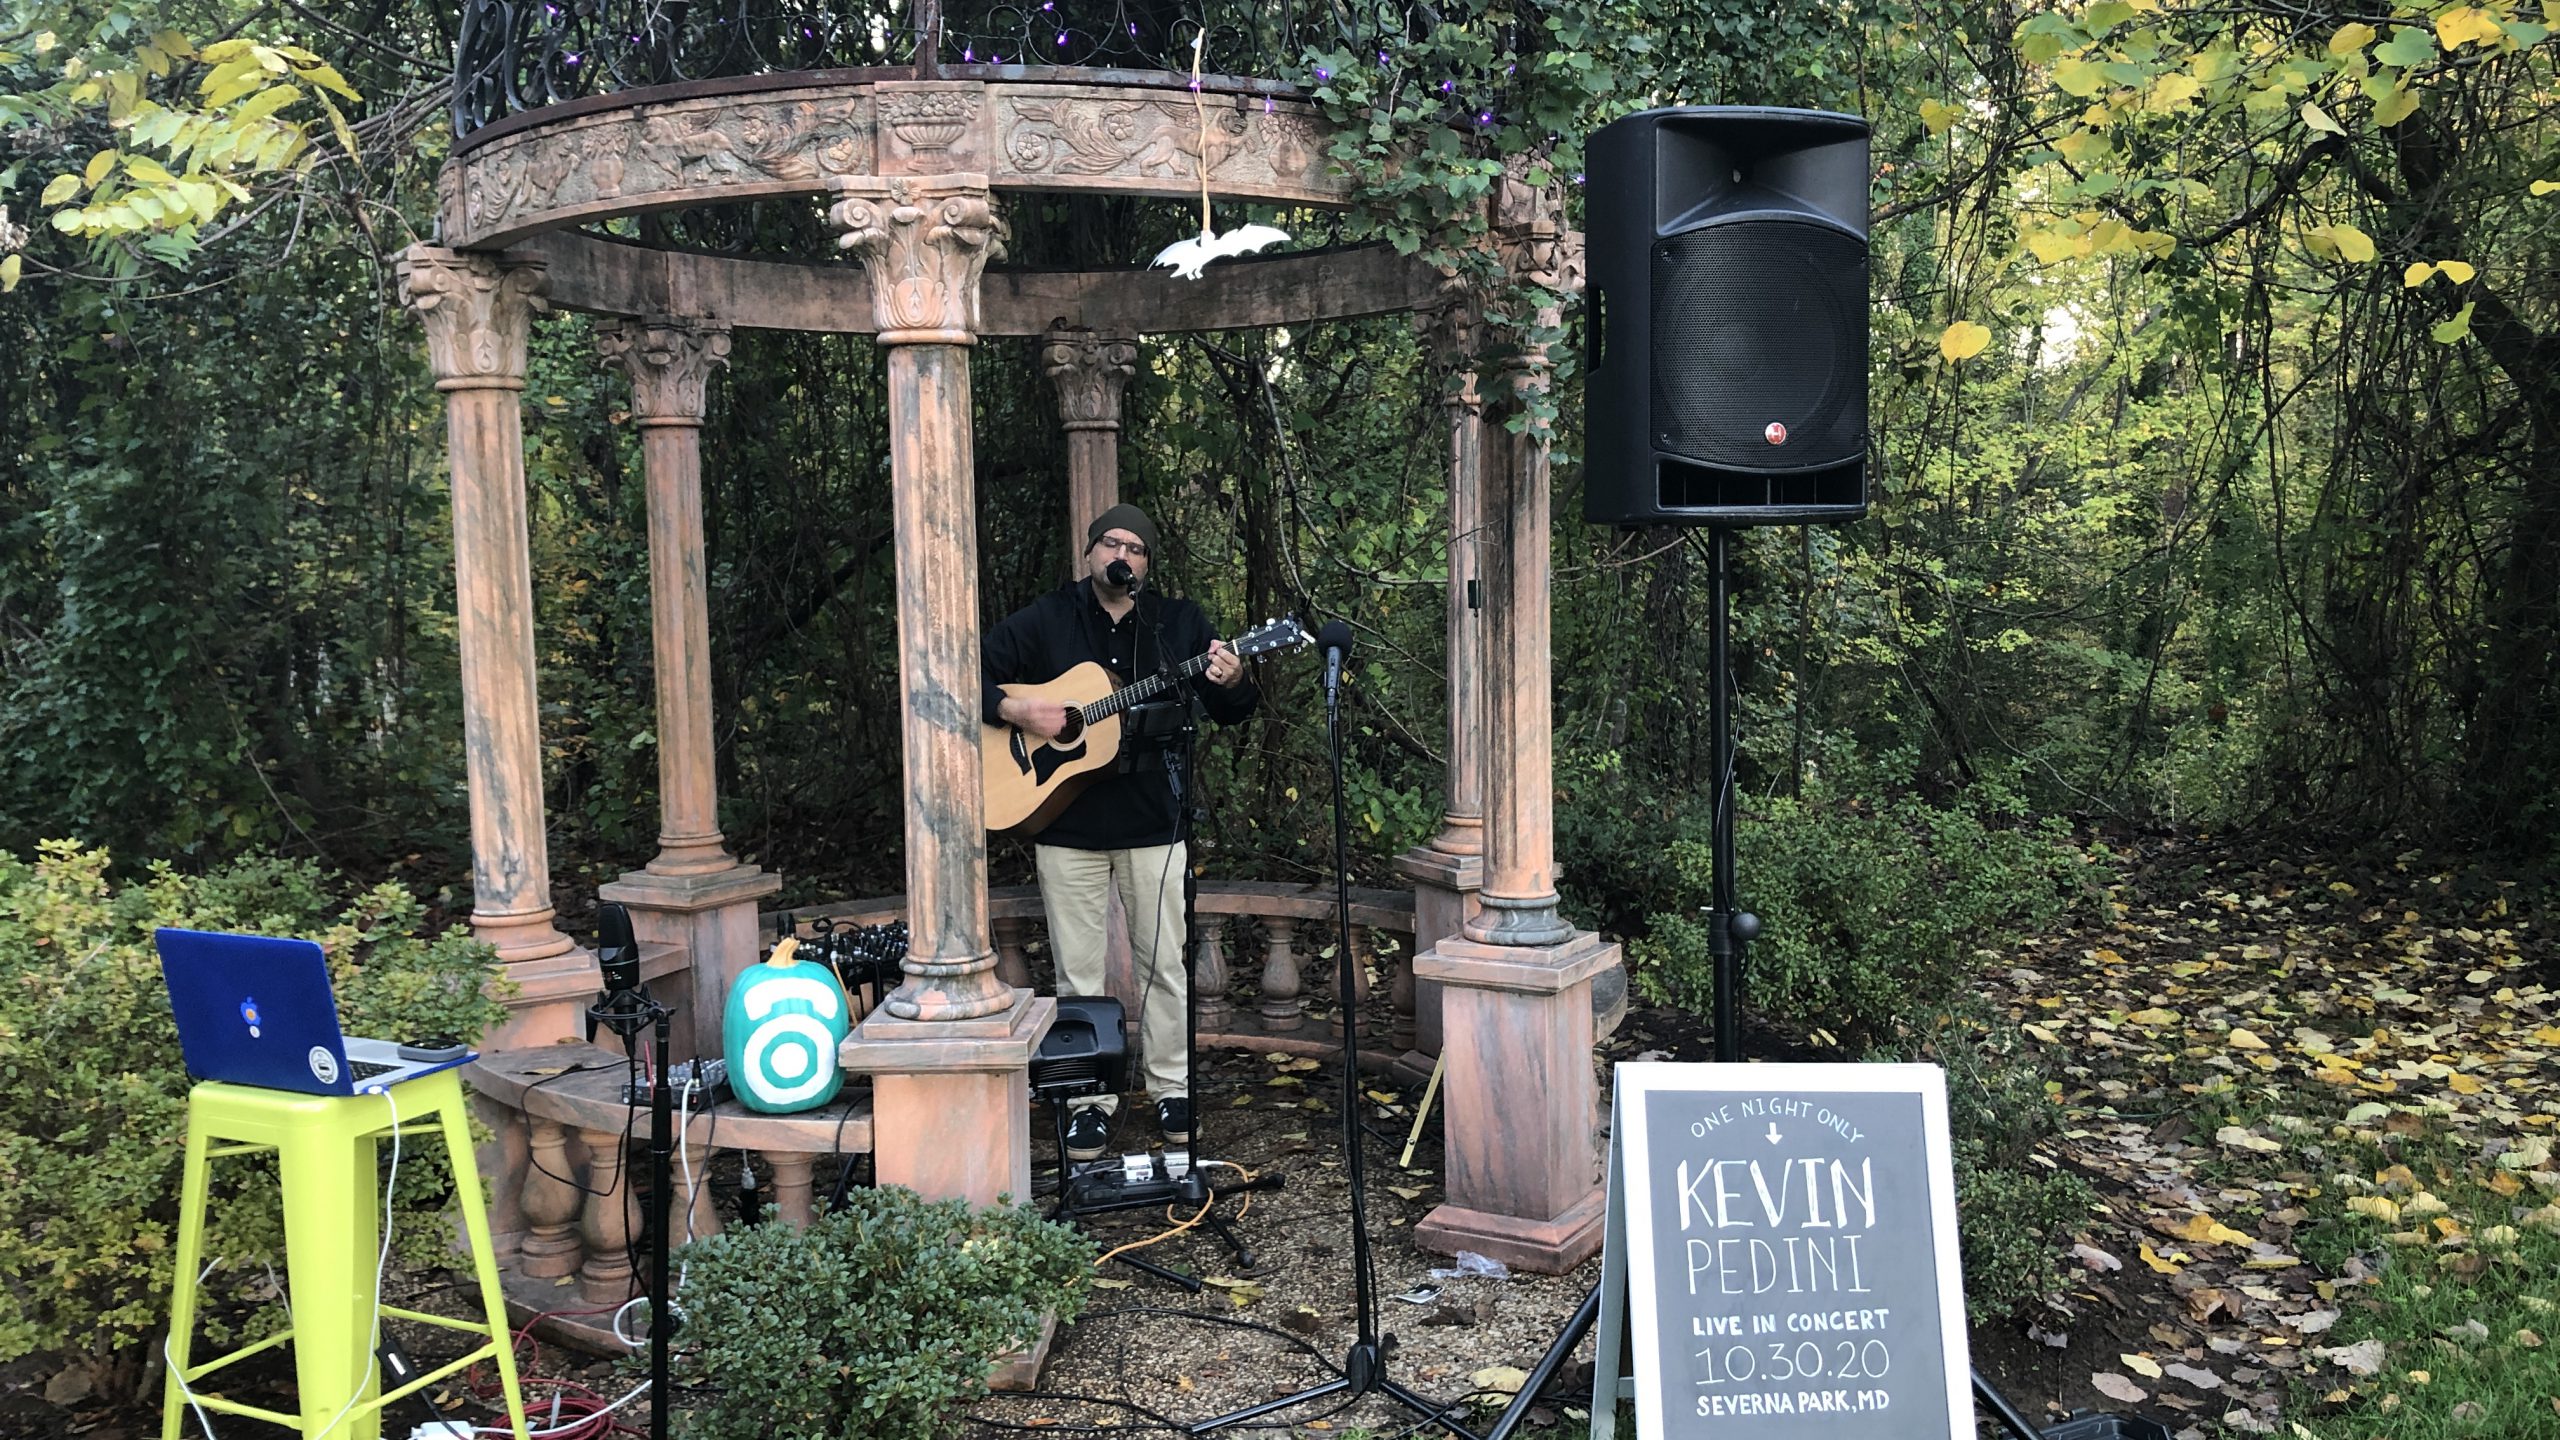 Kevin Pedini, one recipient of an employee recognition award, plays guitar at a company event.